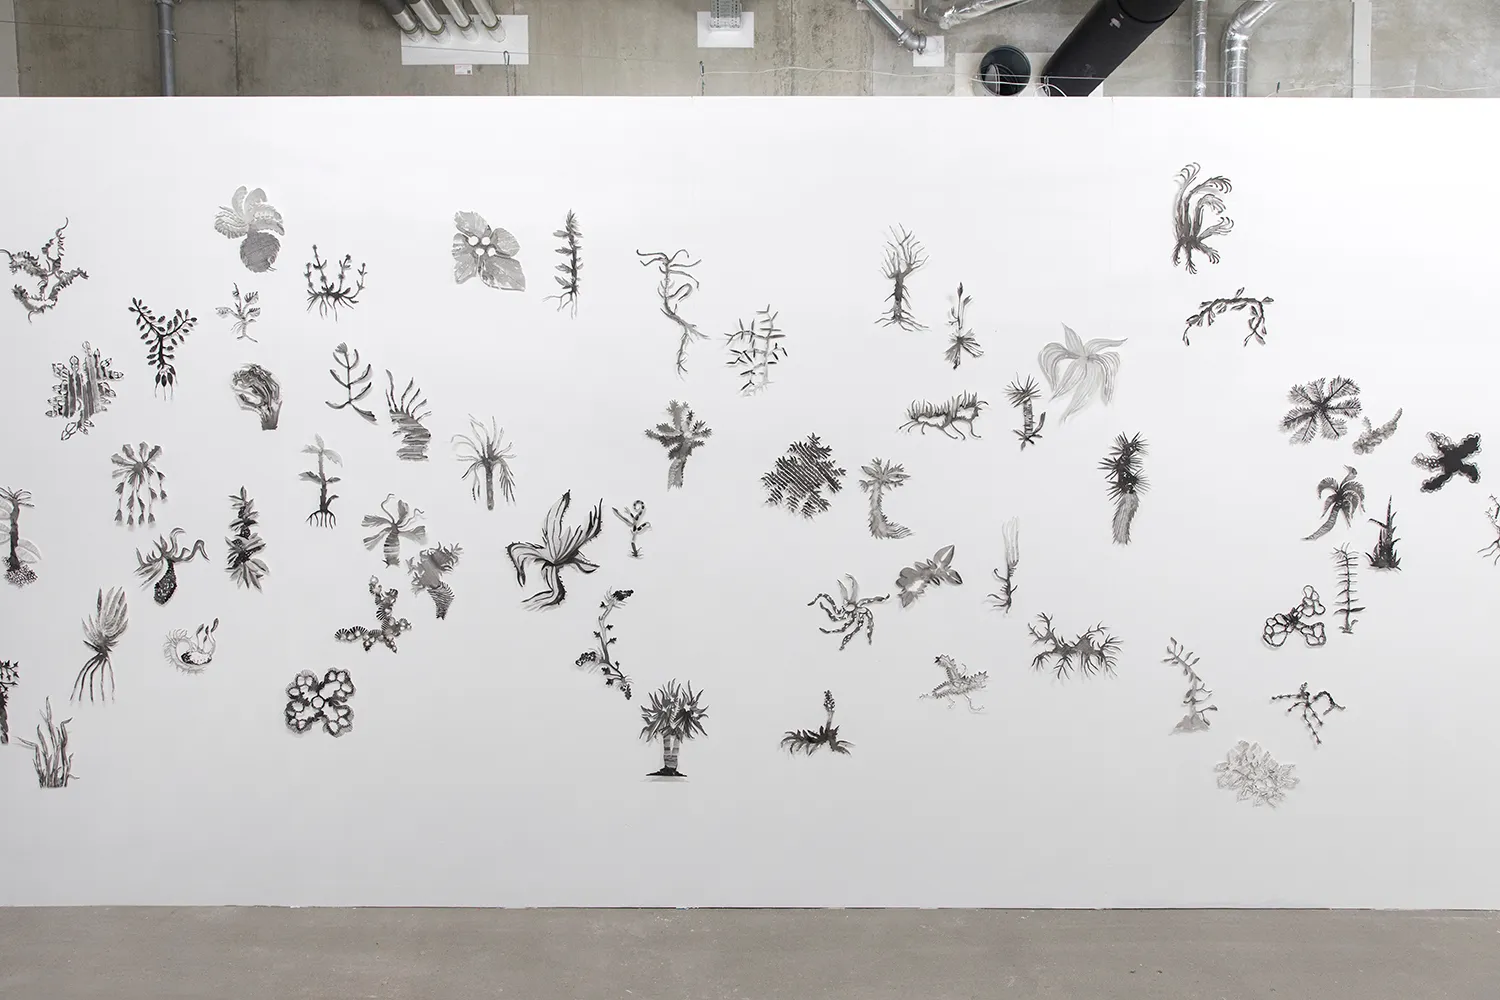 A wall with many black & white paper cut outs of plant-like forms